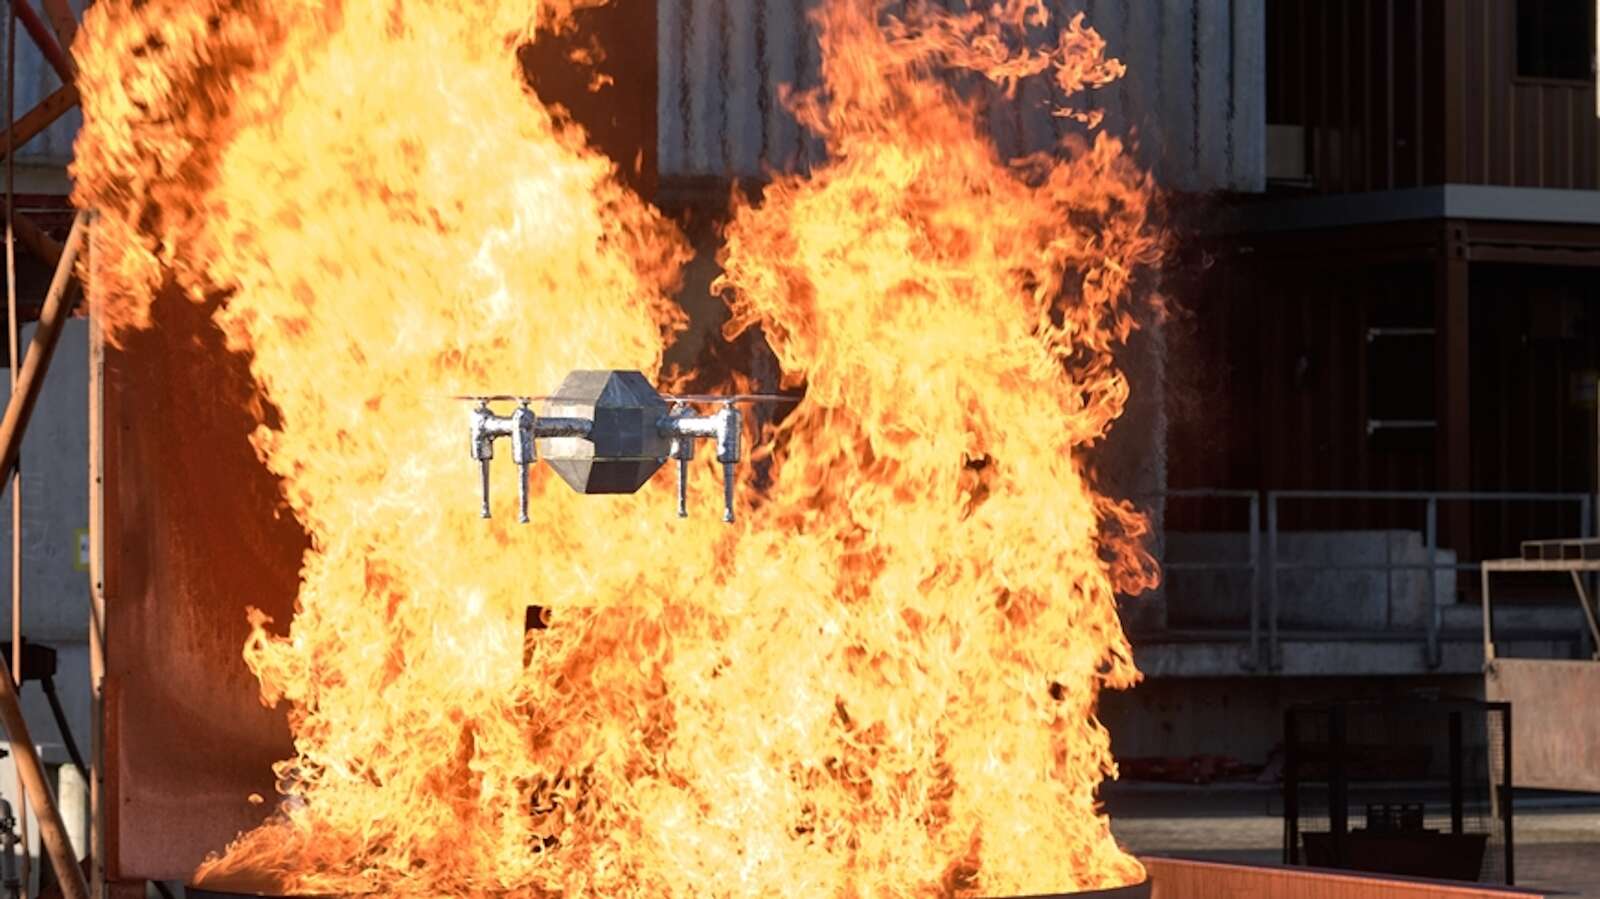 This drone is flame resistant